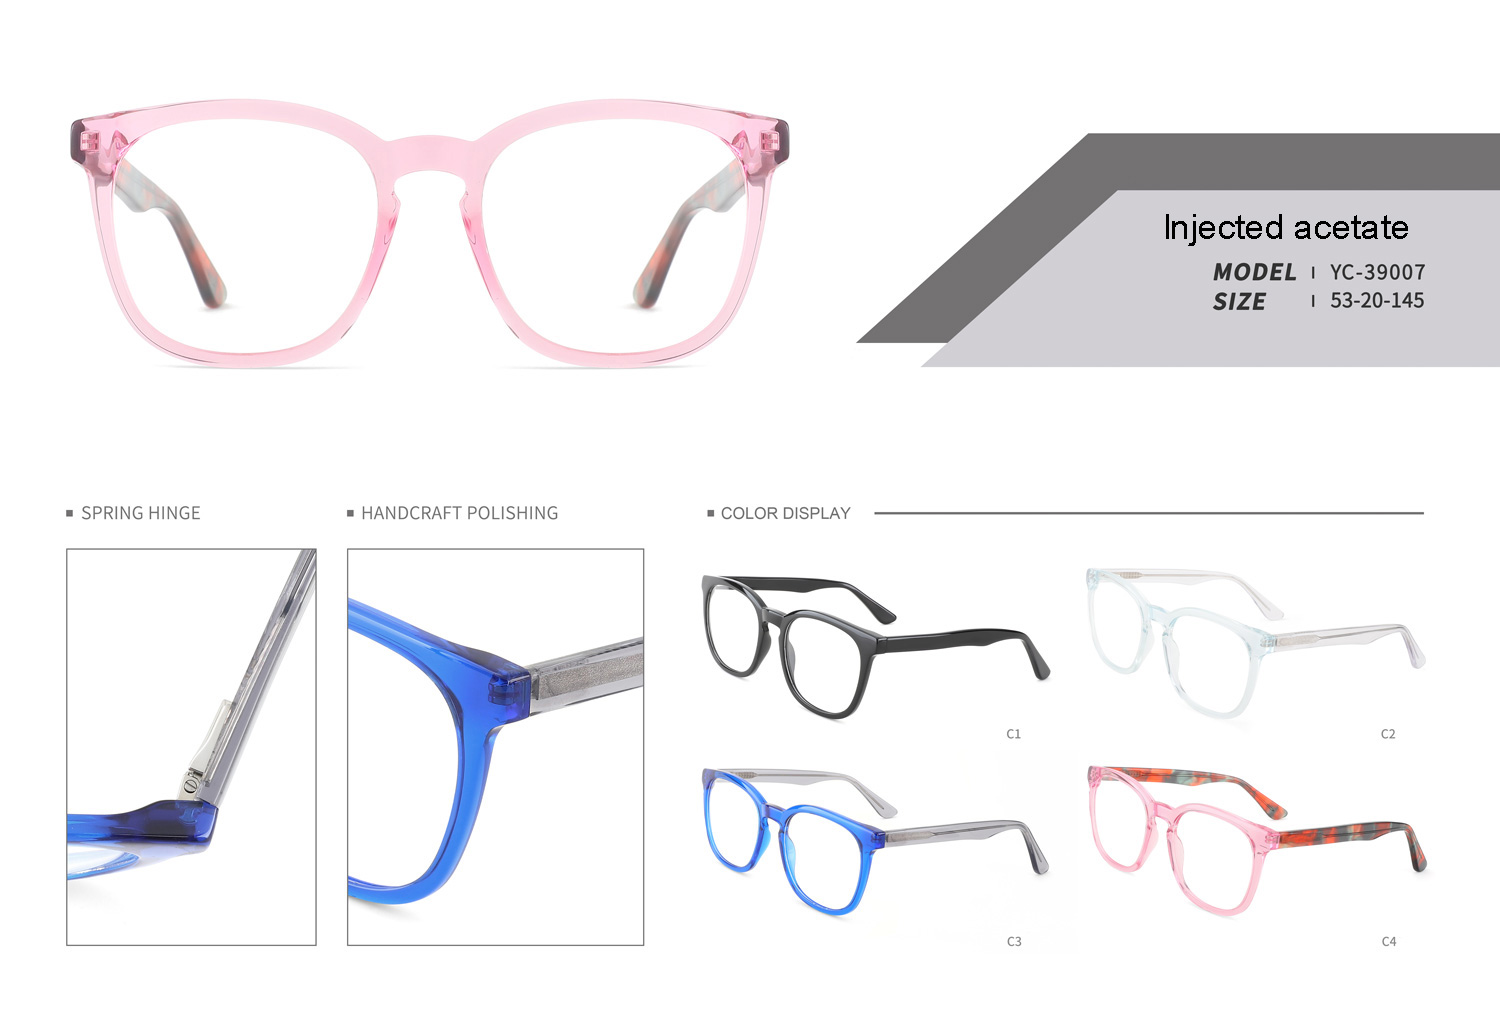 YC39007injected acetate